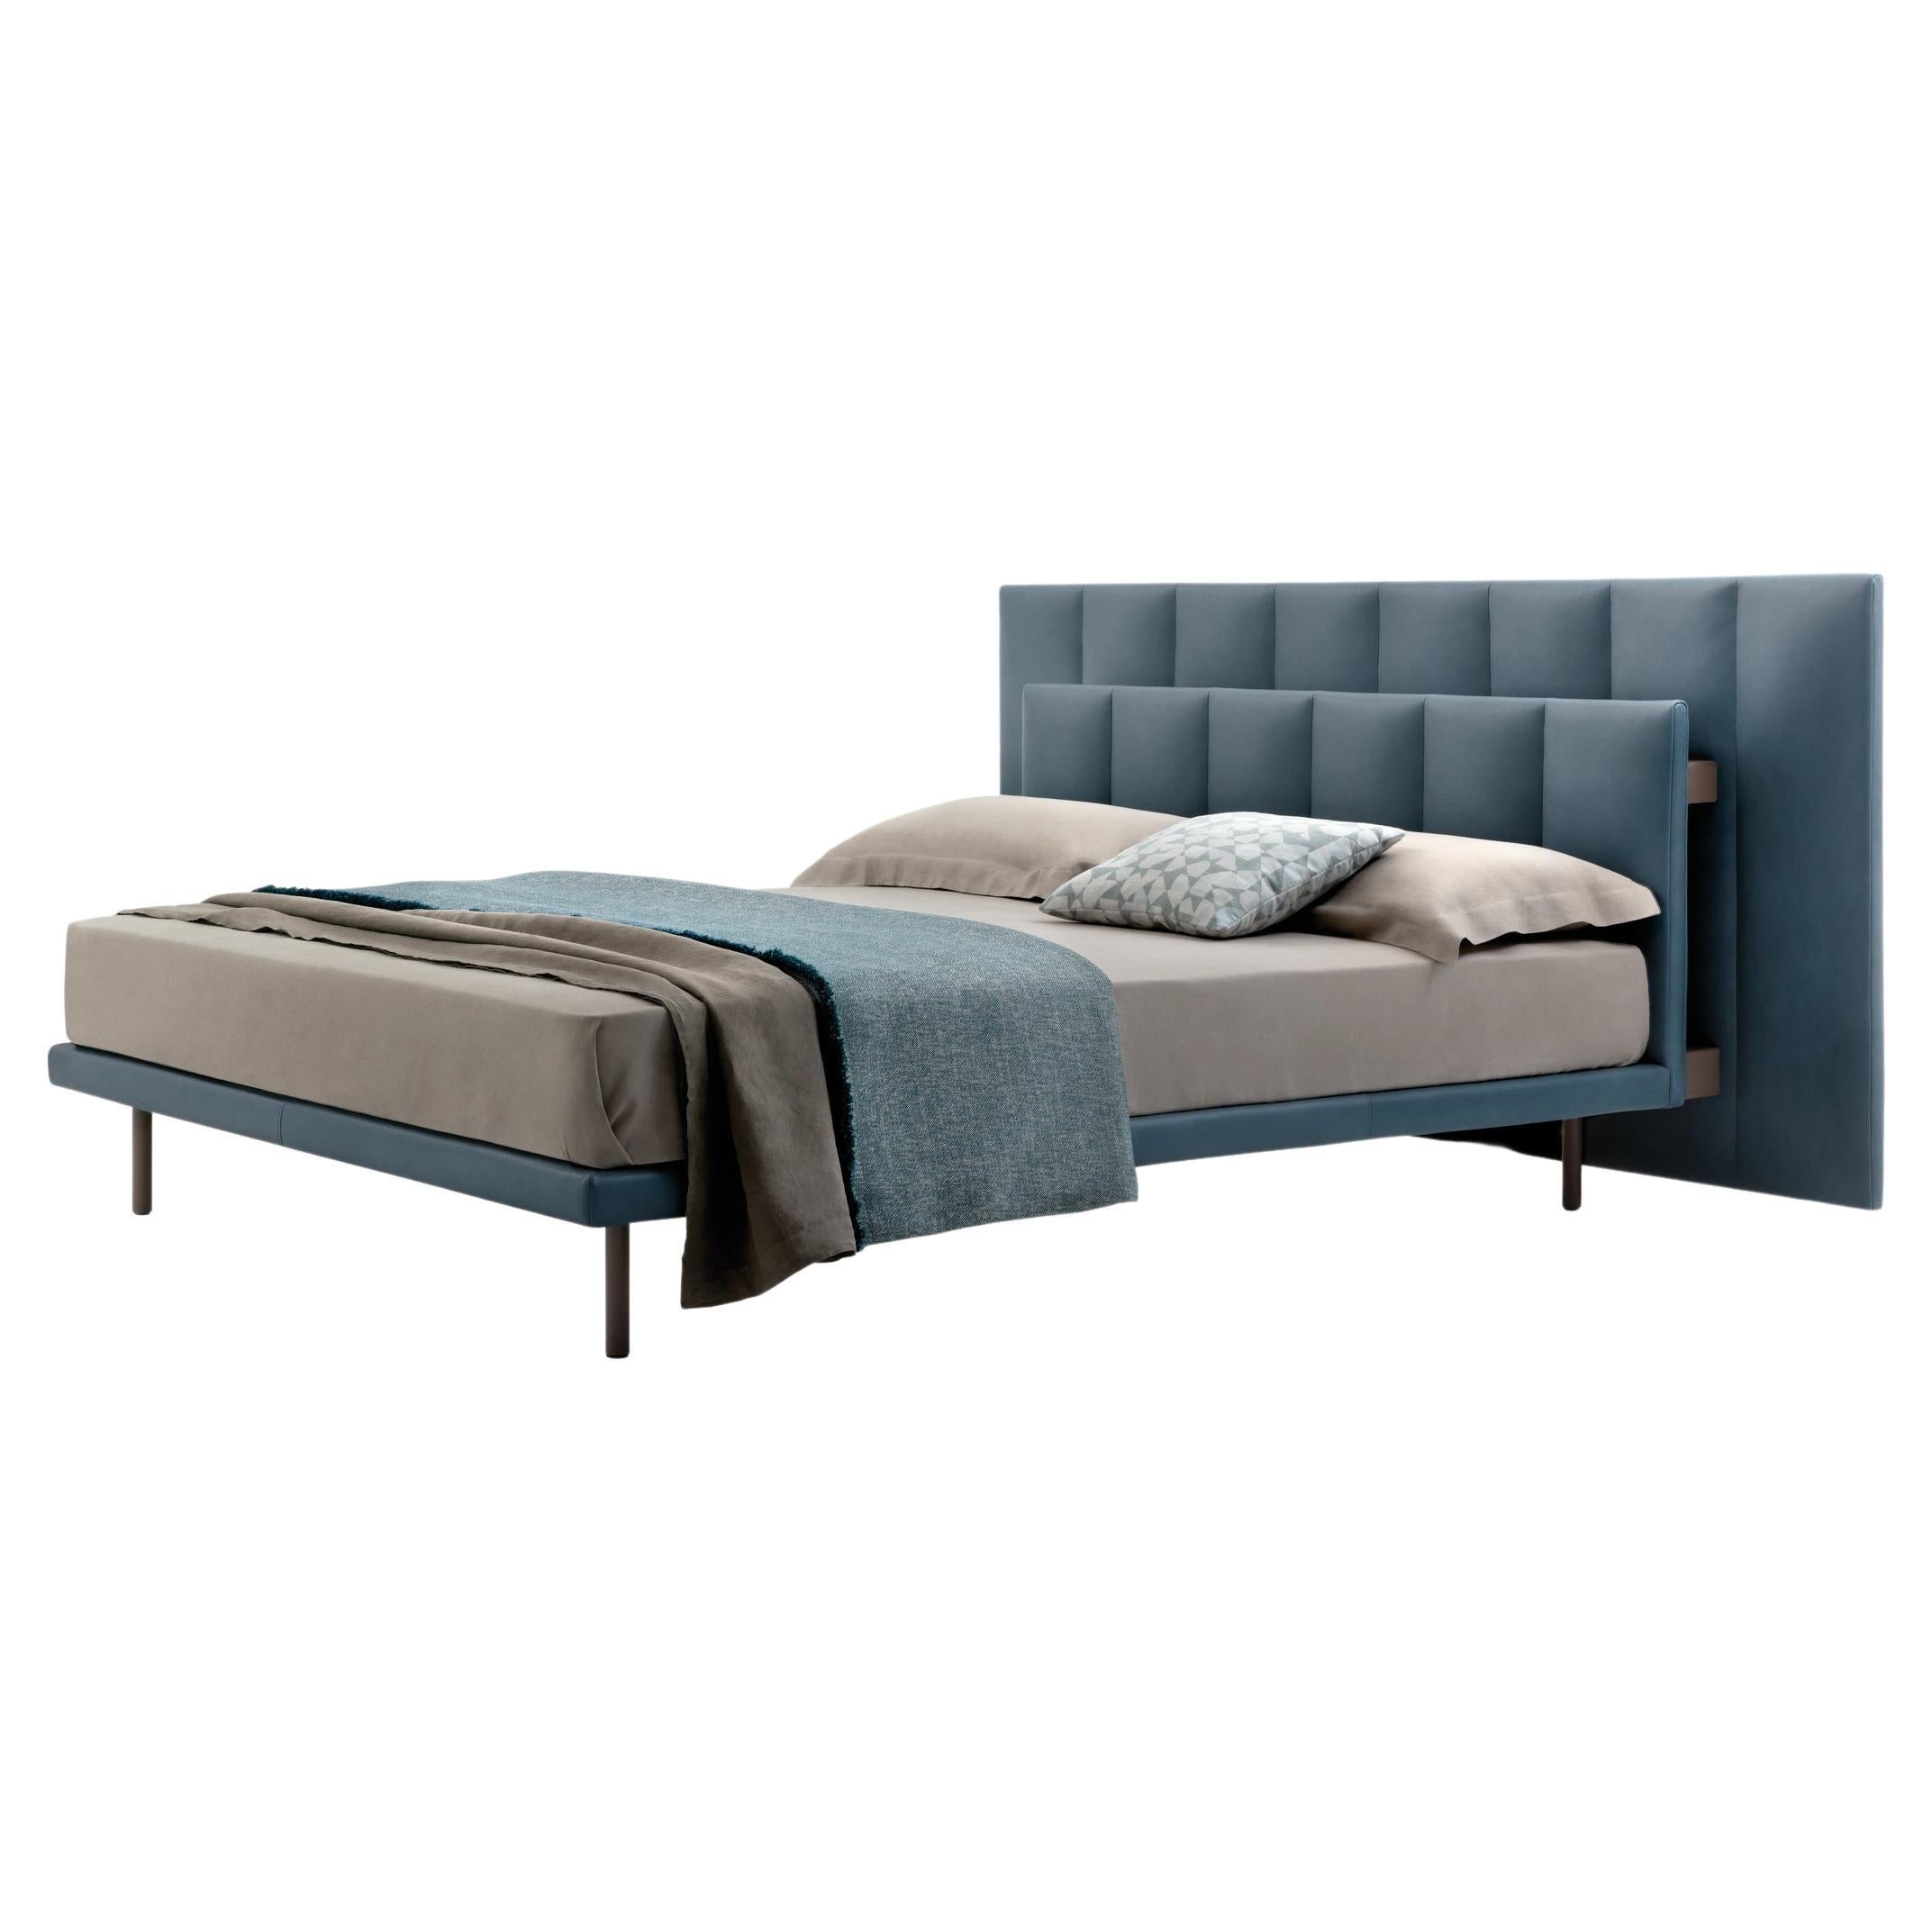 Zanotta Queen Size Grangala Bed with Separate Springing in Grey Upholstery For Sale